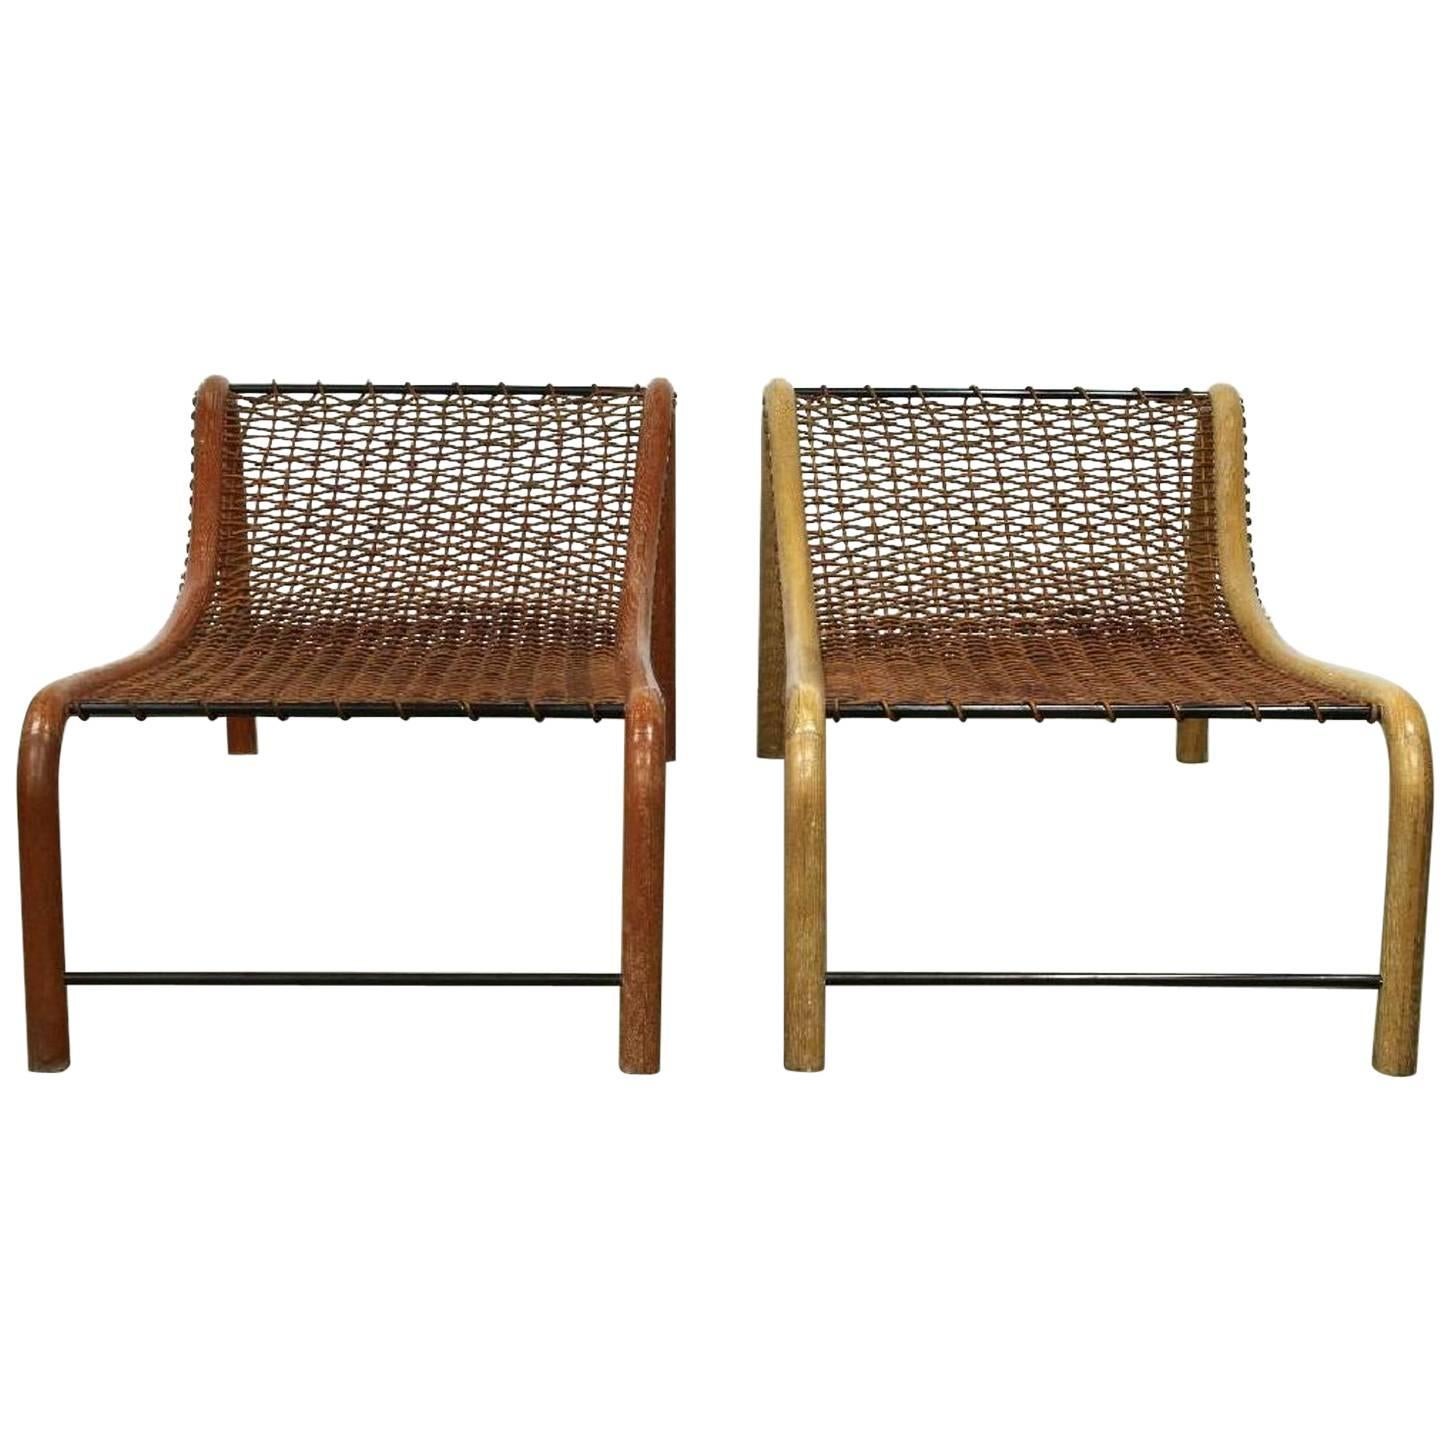  Oversized Bentwood Chaise Lounge Chairs Woven by William Emmerson